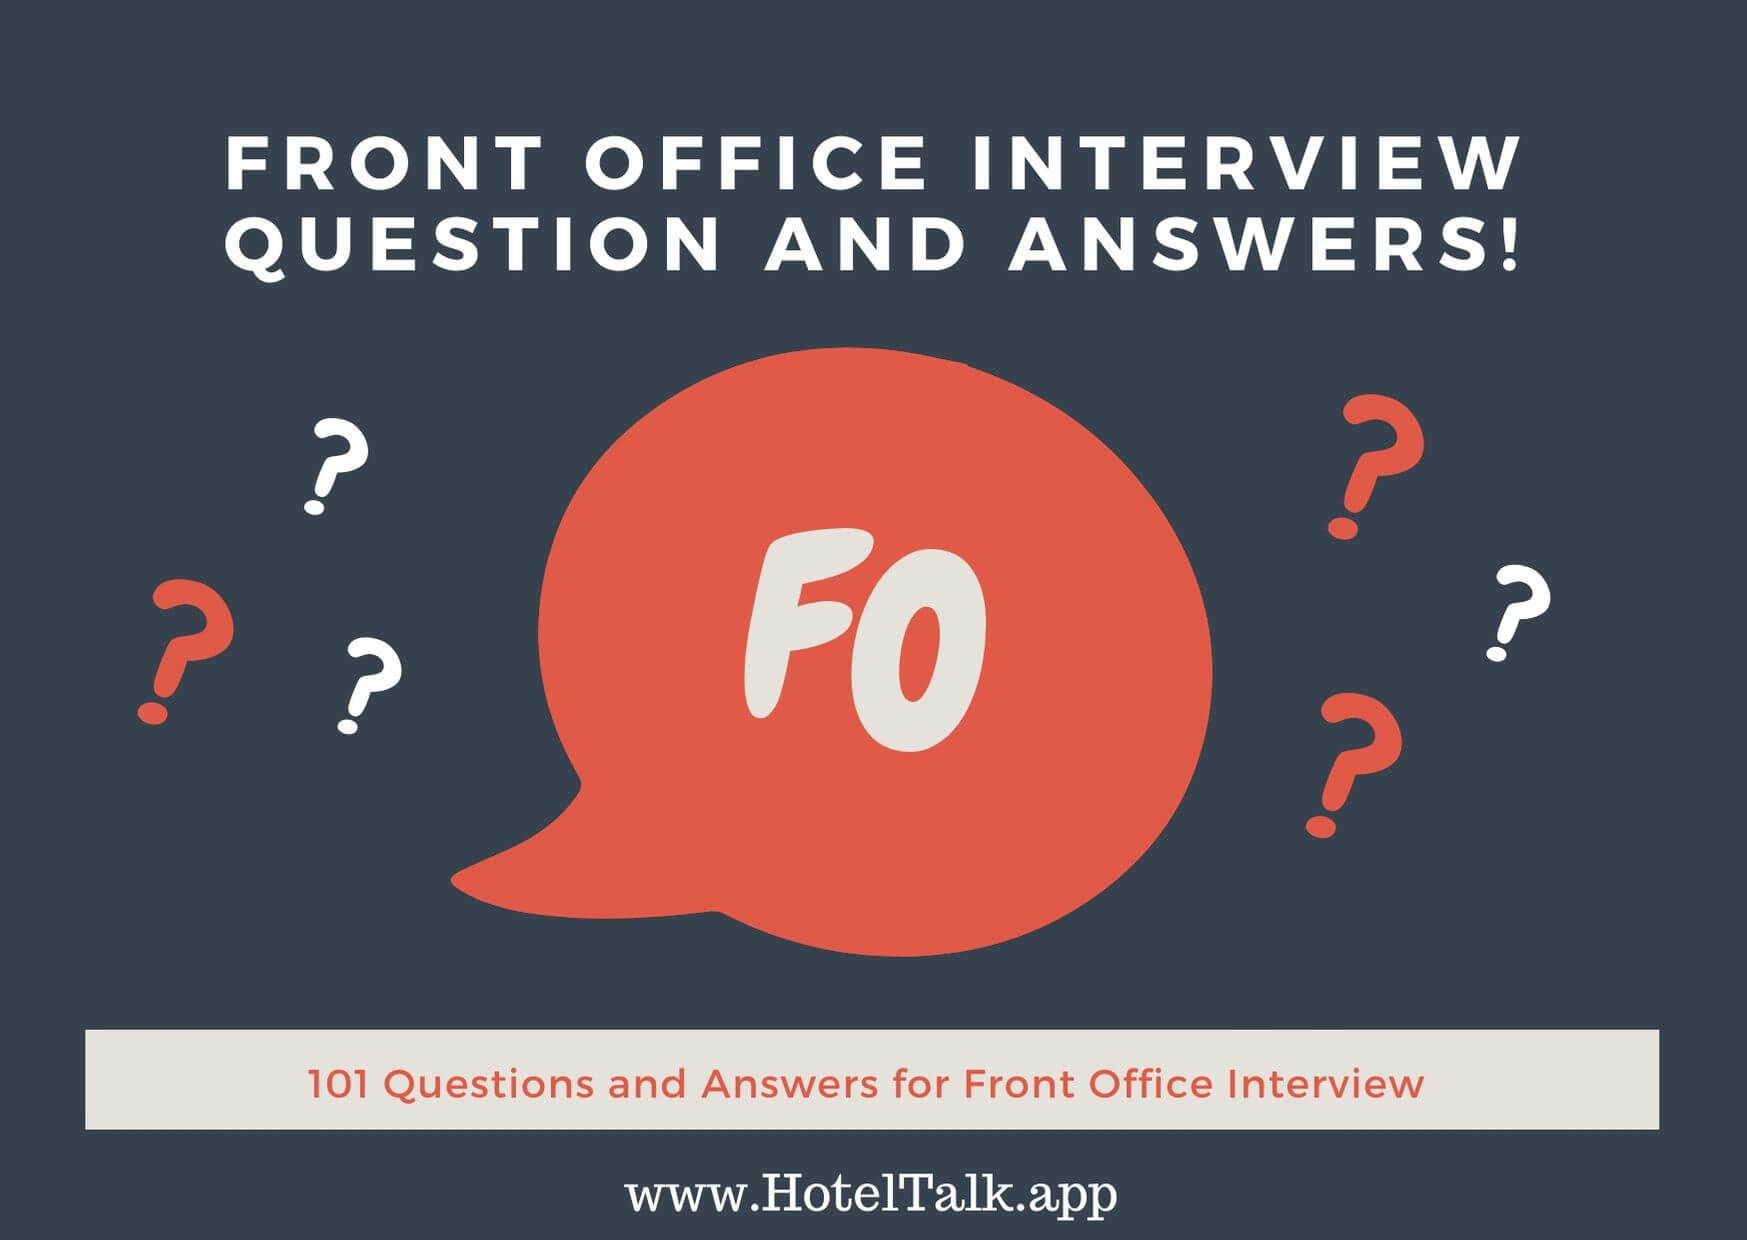 101 Front Office Job Interview Questions and Answers